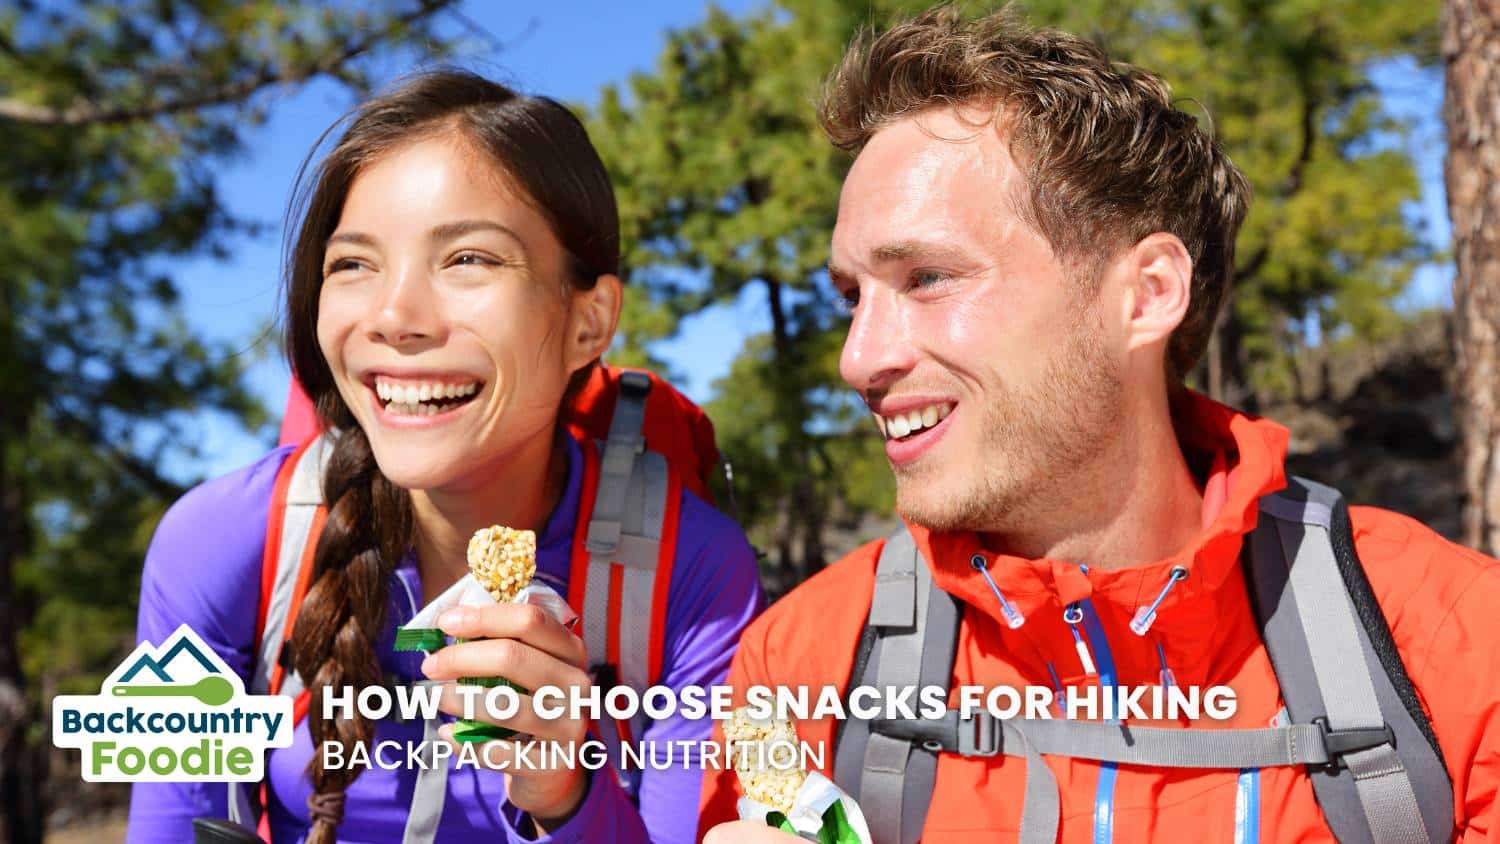 Bakcountry Foodie How to Choose Hiking Snacks Backpacking Nutrition blog thumbnail image